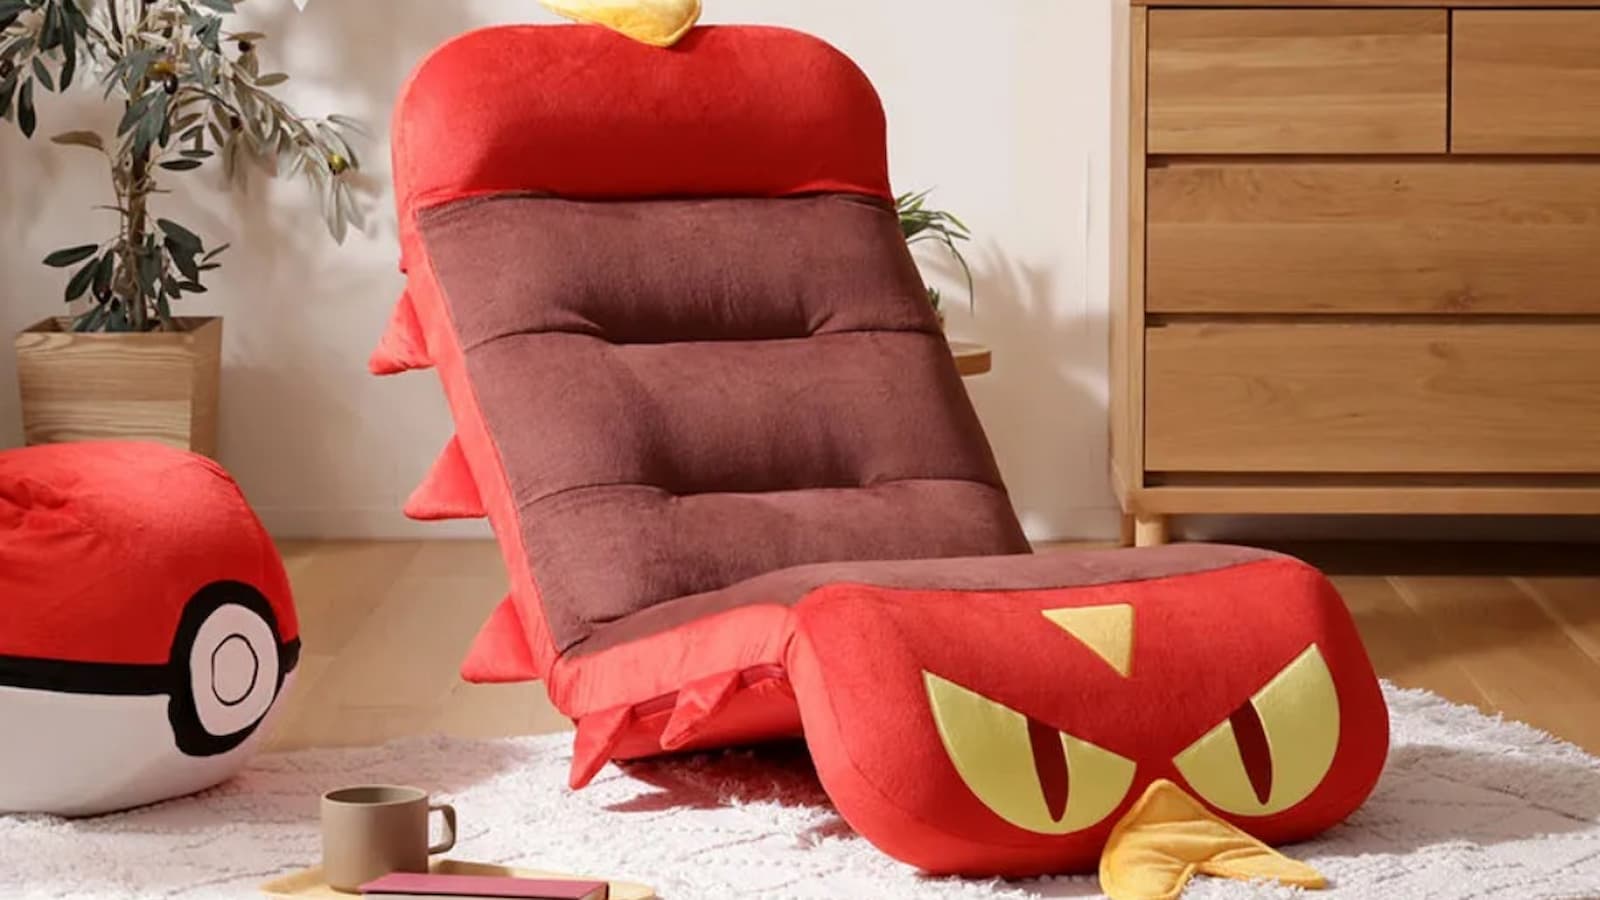 Sizzlipede child chair made by The Pokemon Company